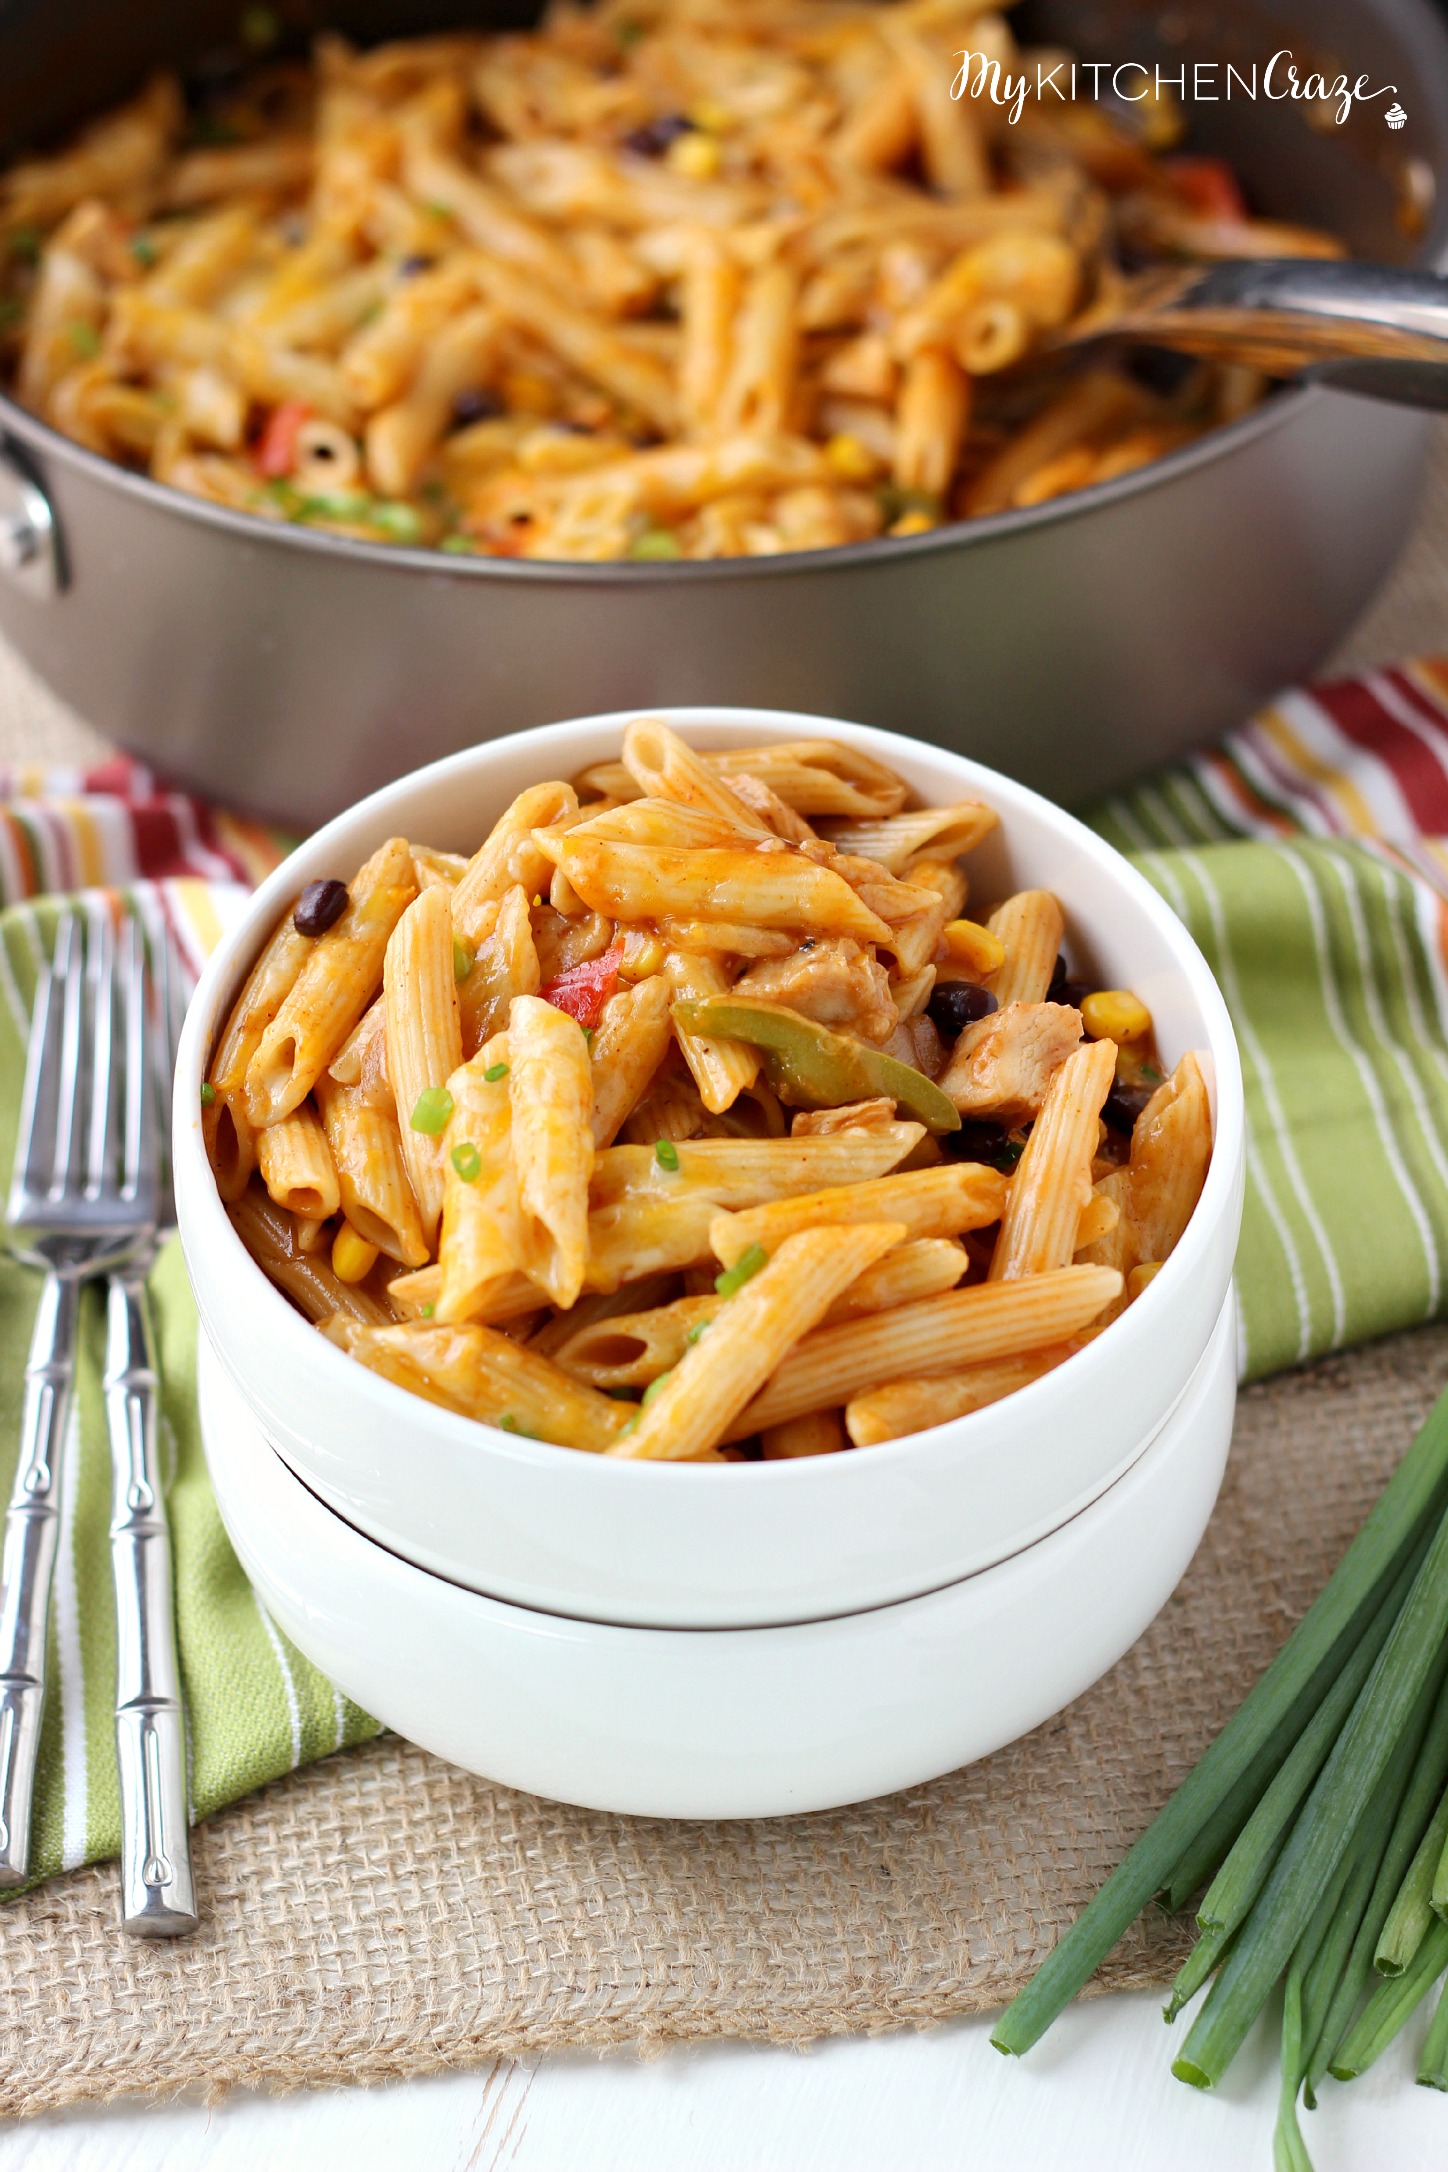 Four Cheese Chicken Enchilada Pasta ~ www.mykitchencraze.com ~ Have an easy and delicious meal on your table within 10 minutes. Quick, easy and a family favorite!